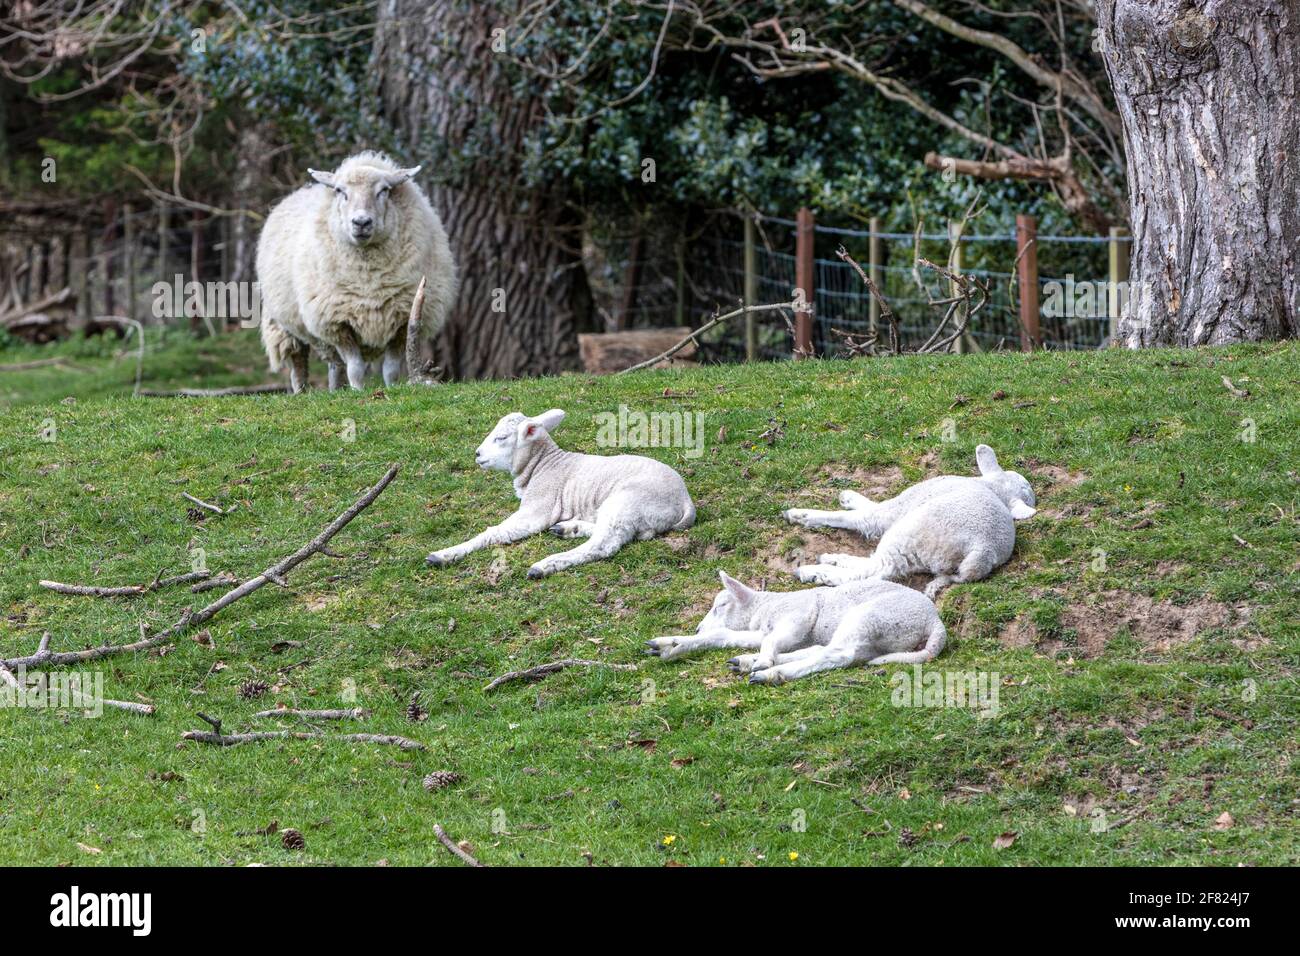 A ewe and three lambs in a grass field Stock Photo